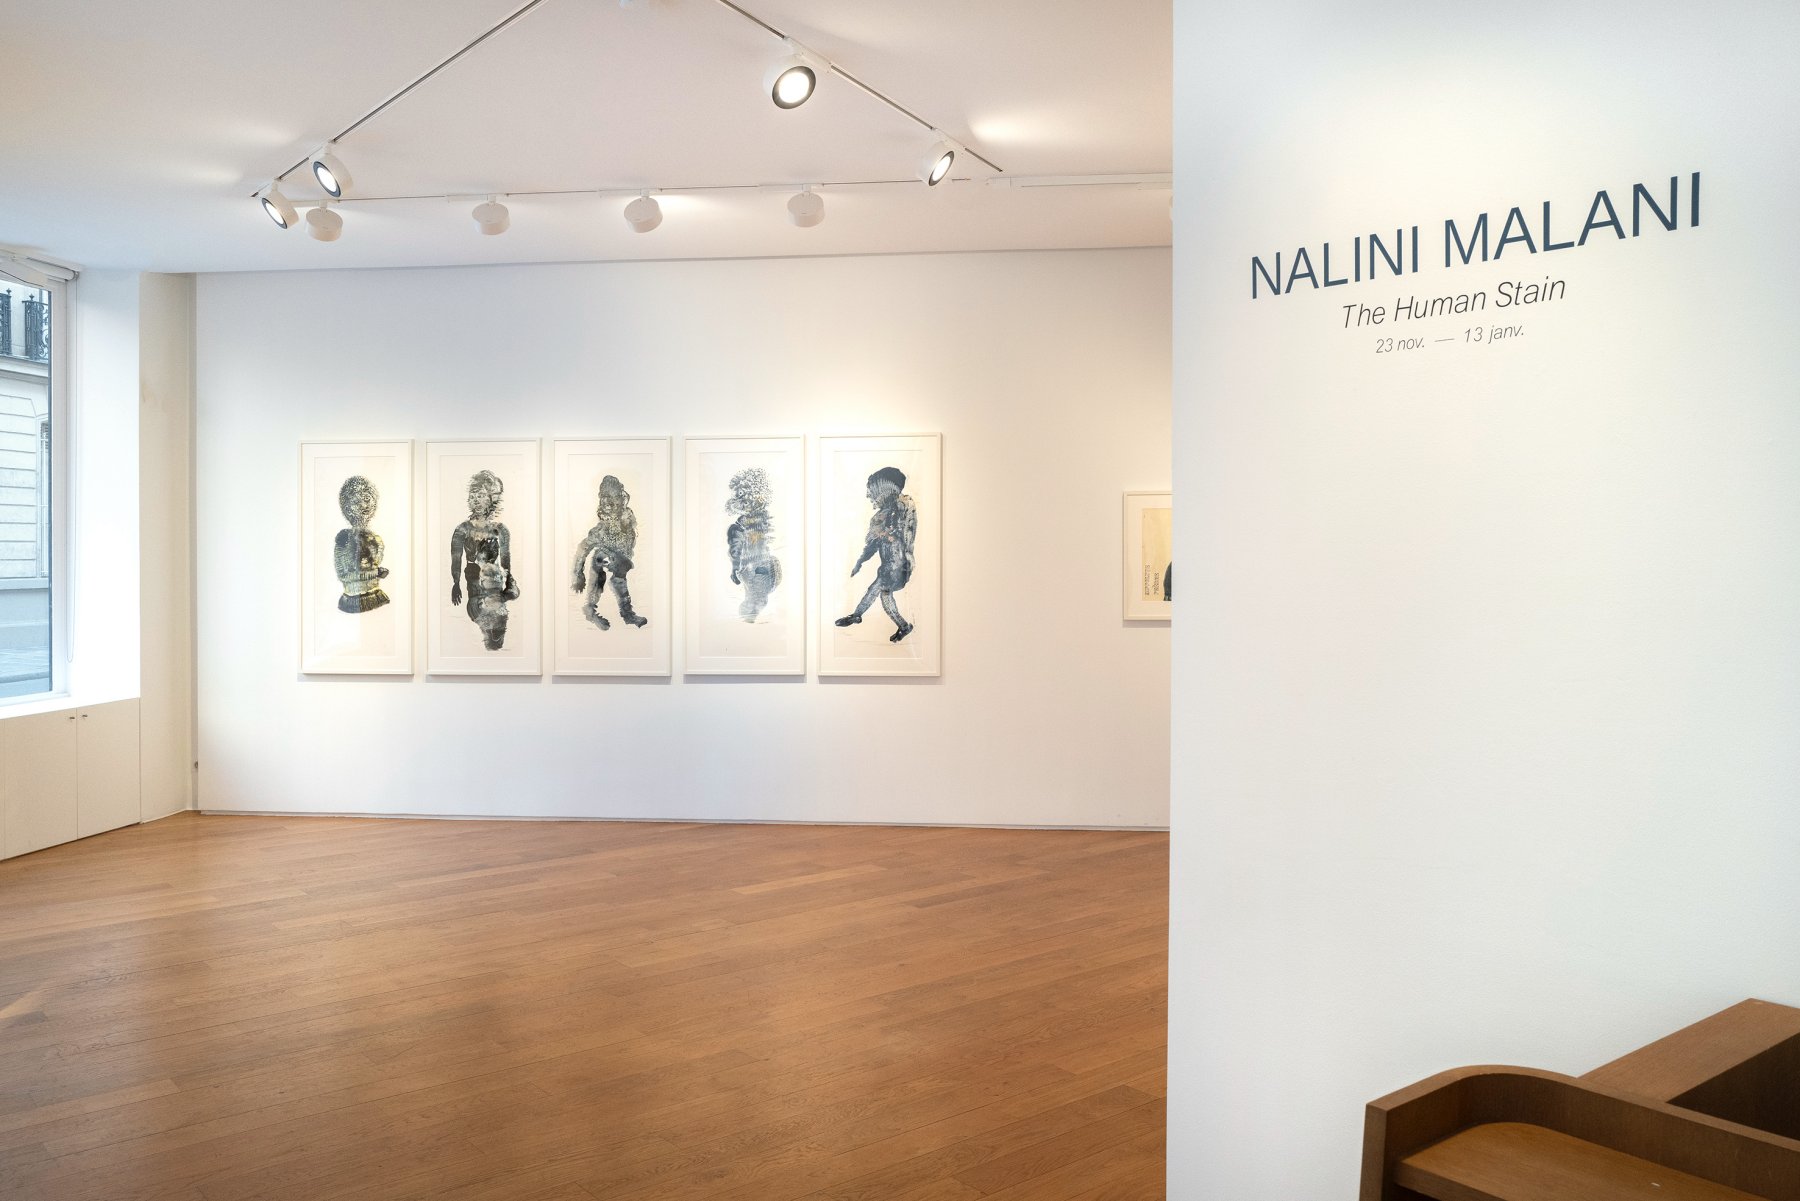 Installation image for Nalini Malani: The Human Stain, at Galerie Lelong & Co.